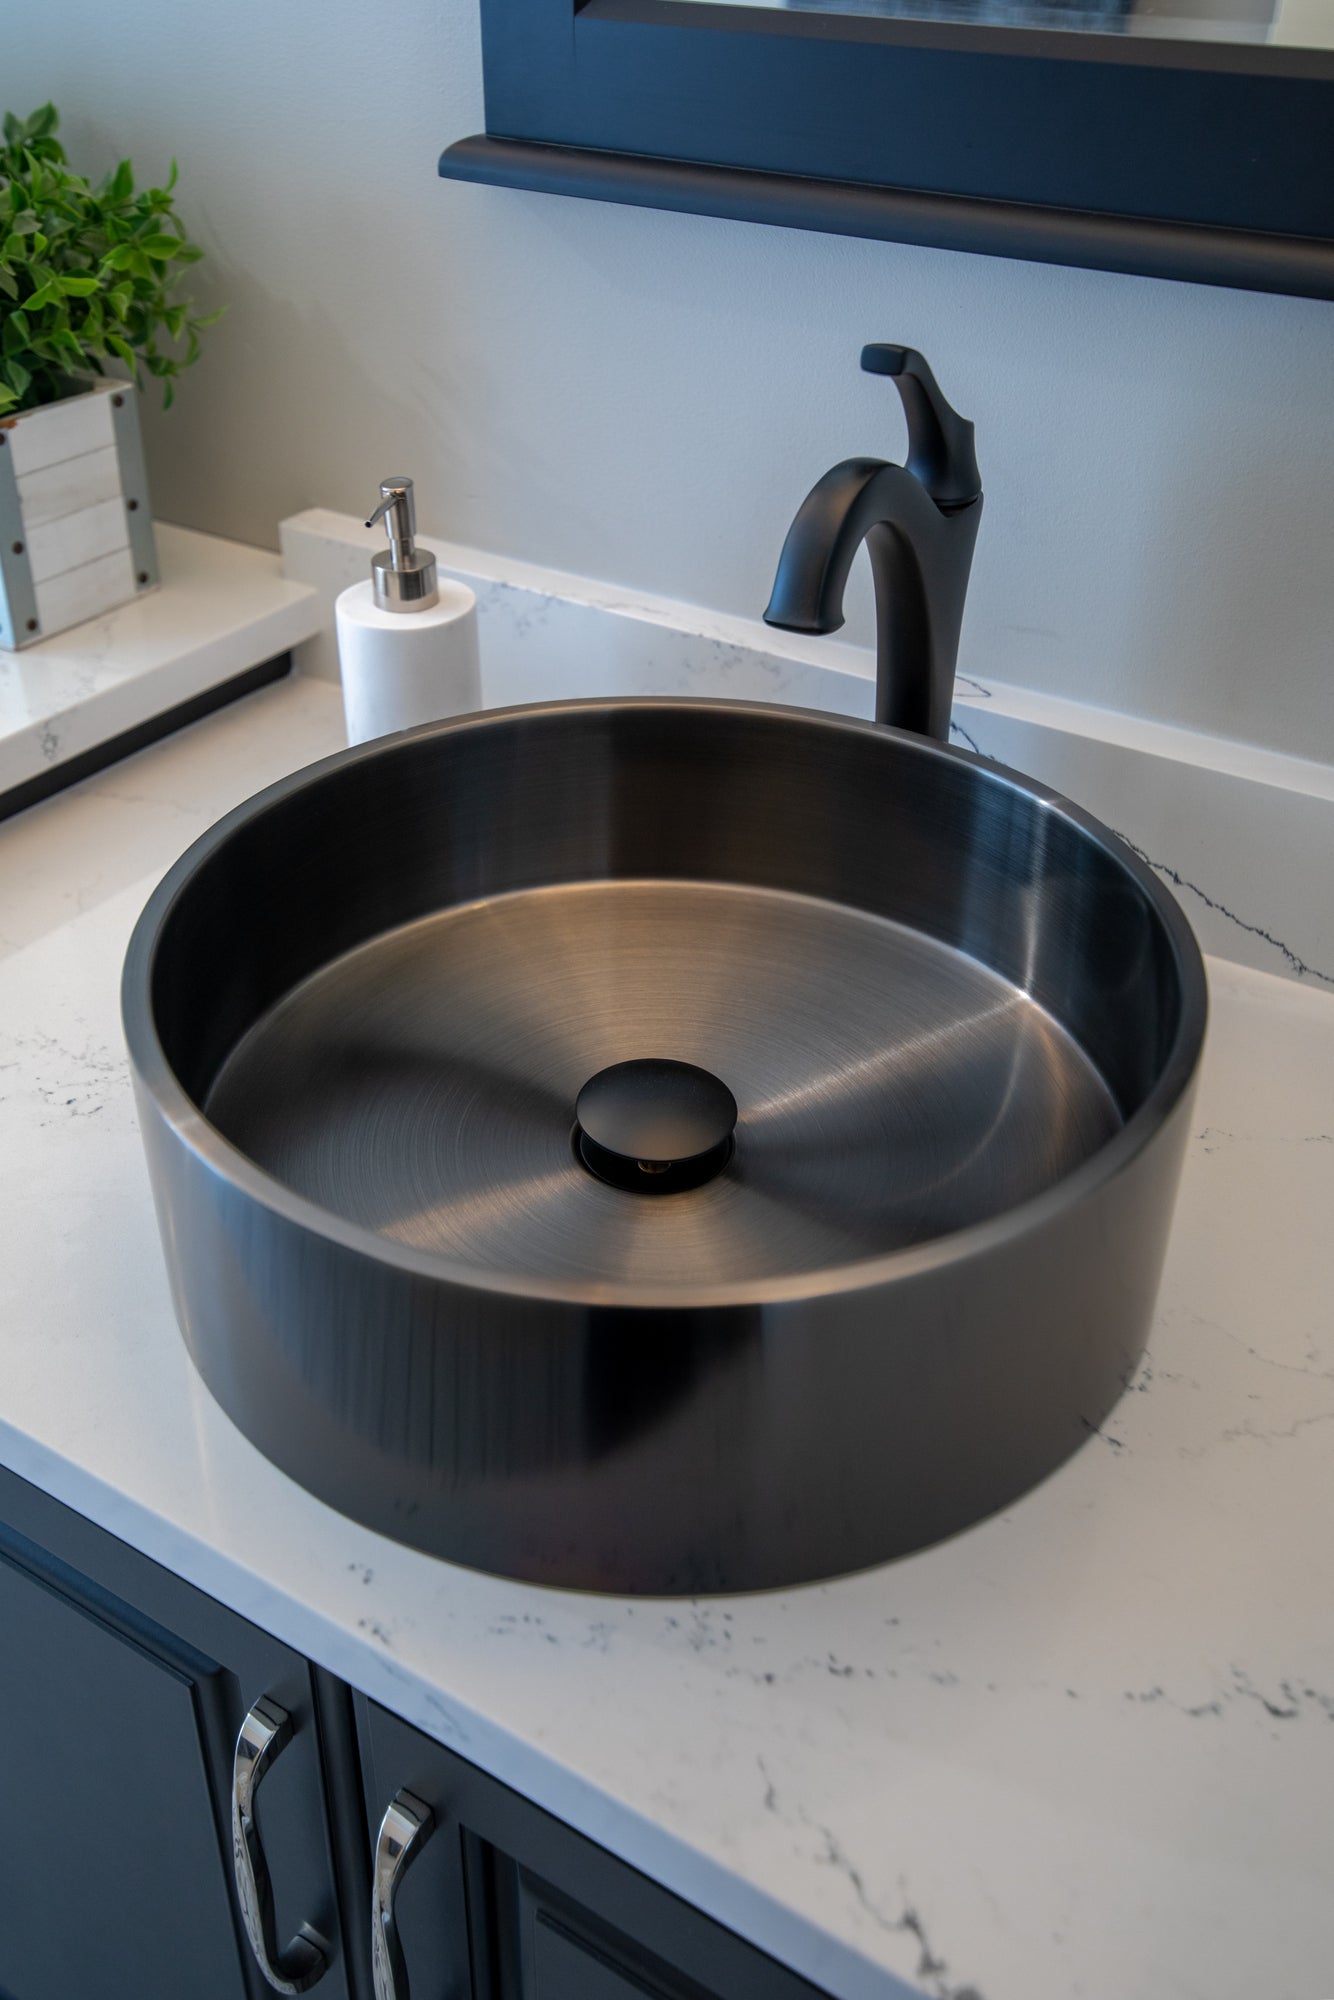 15 3/4" Round Thick Rim Stainless Steel Bathroom Vessel Sink with Drain in Black